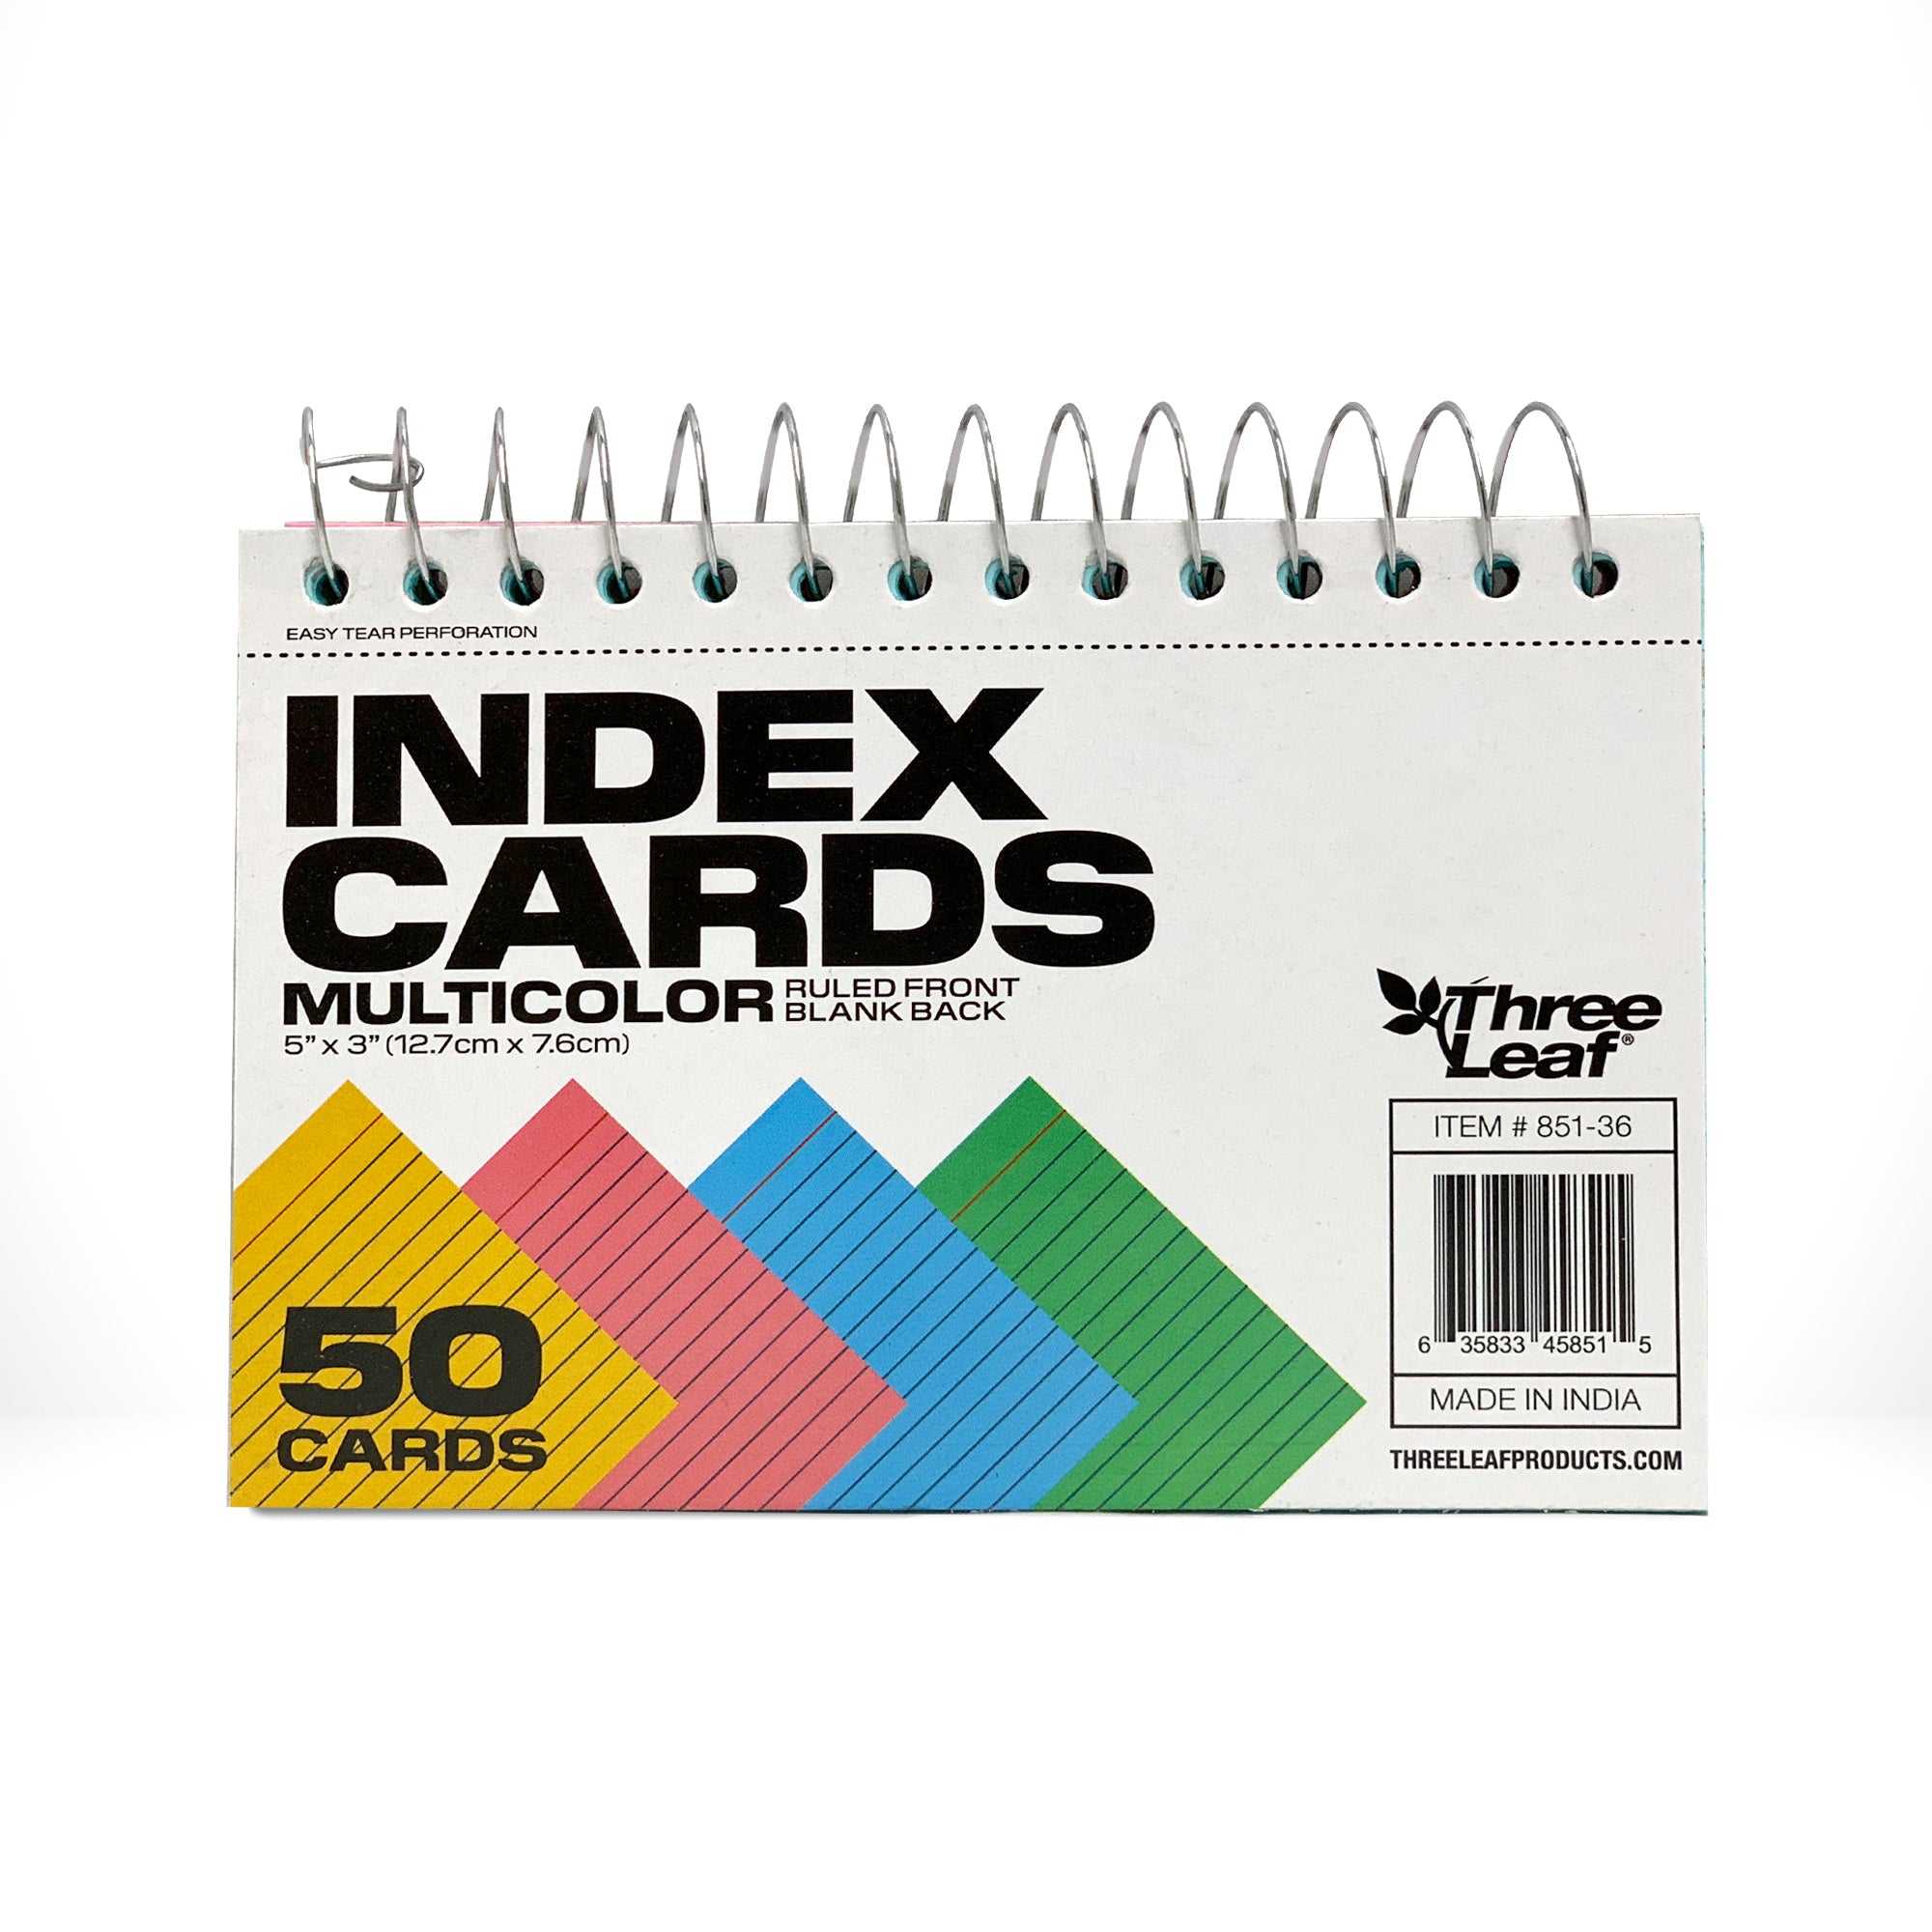 Wholesale 3 x 5 Ruled Index Cards in Colors - DollarDays